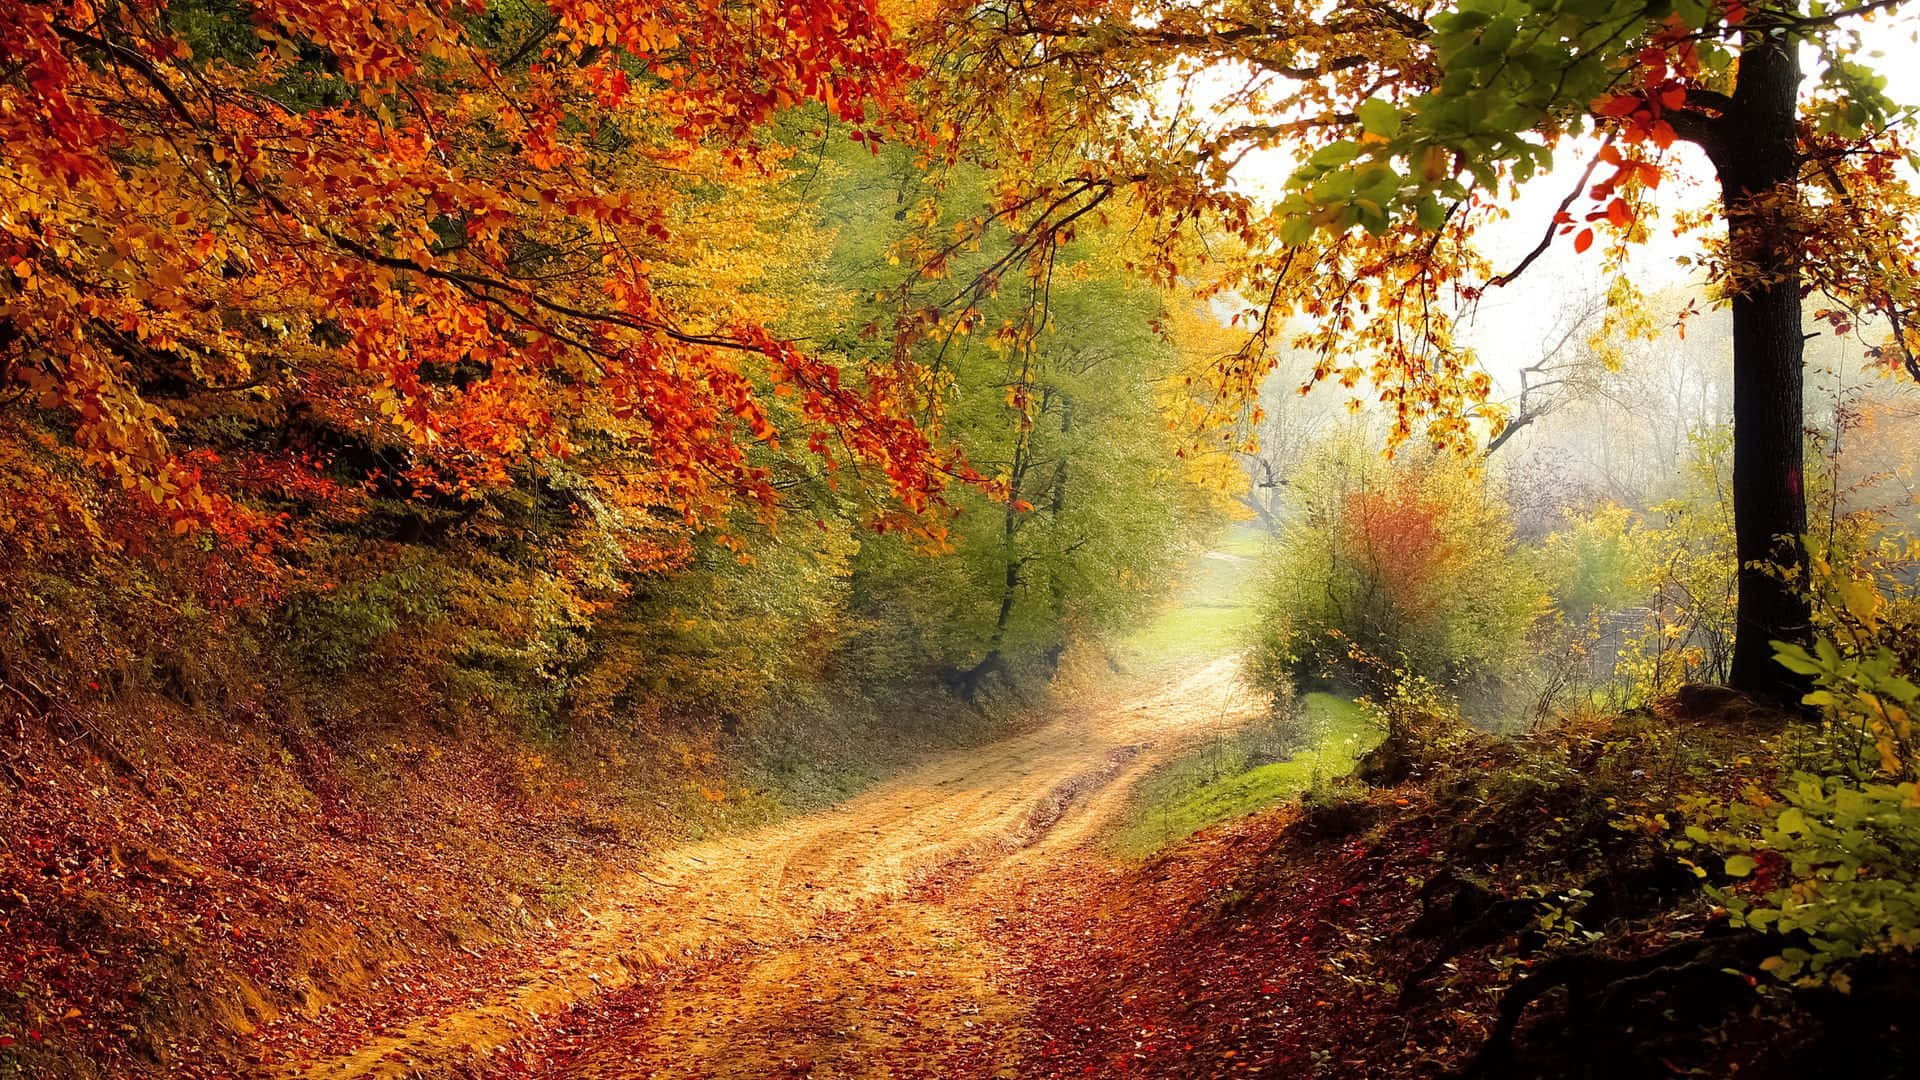 A Dirt Road In The Forest With Autumn Leaves Wallpaper